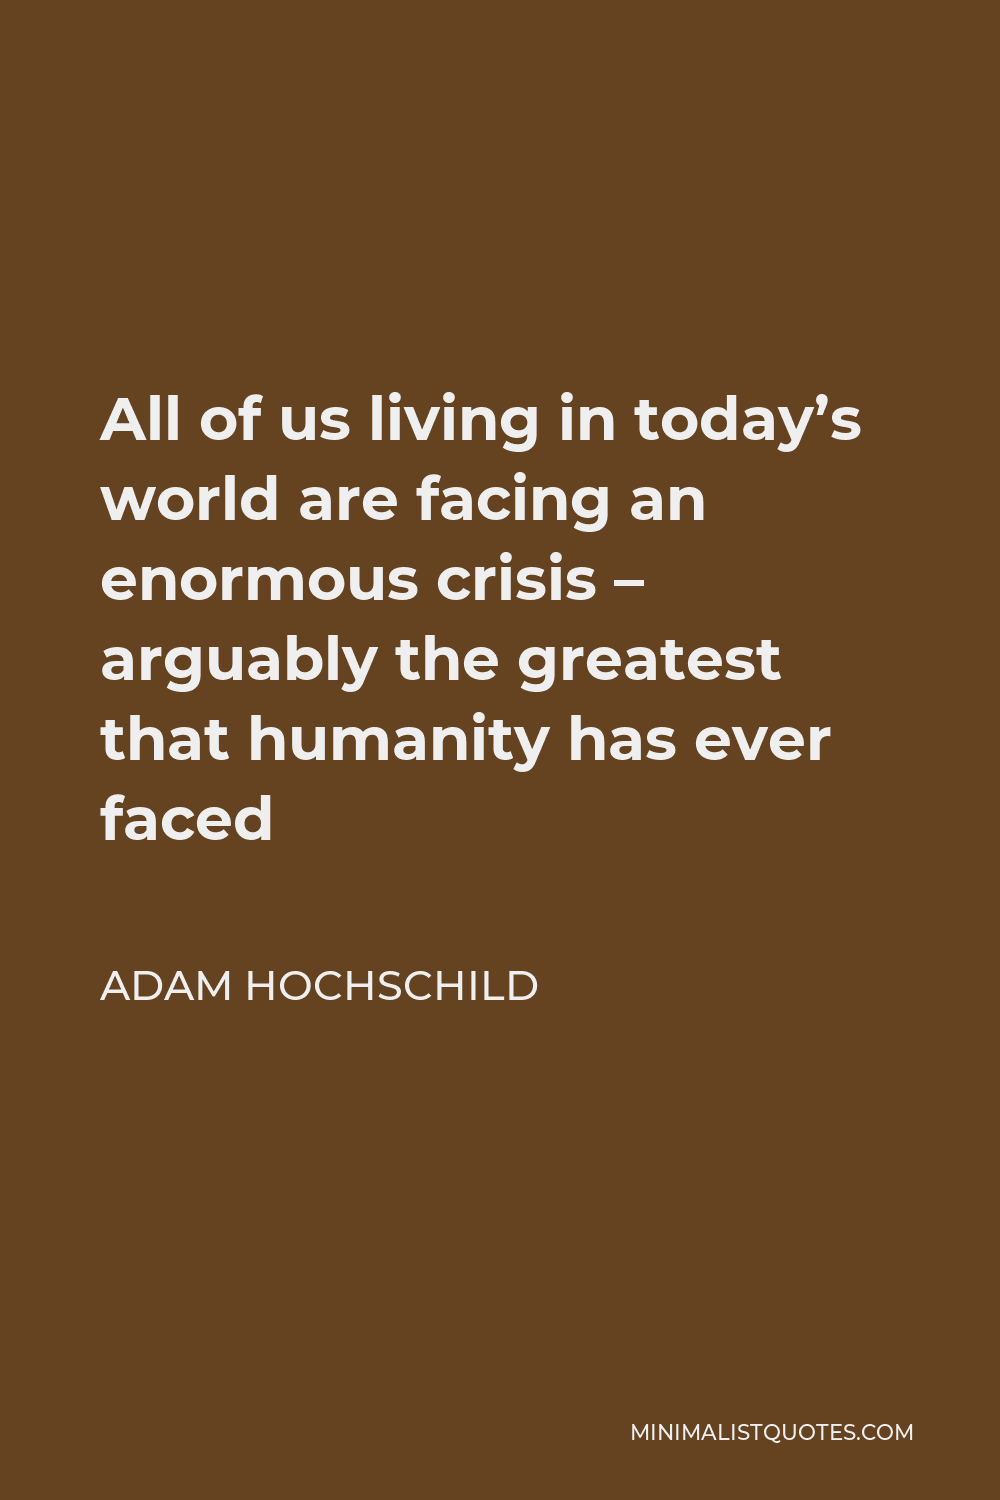 Adam Hochschild Quote - All of us living in today’s world are facing an enormous crisis – arguably the greatest that humanity has ever faced